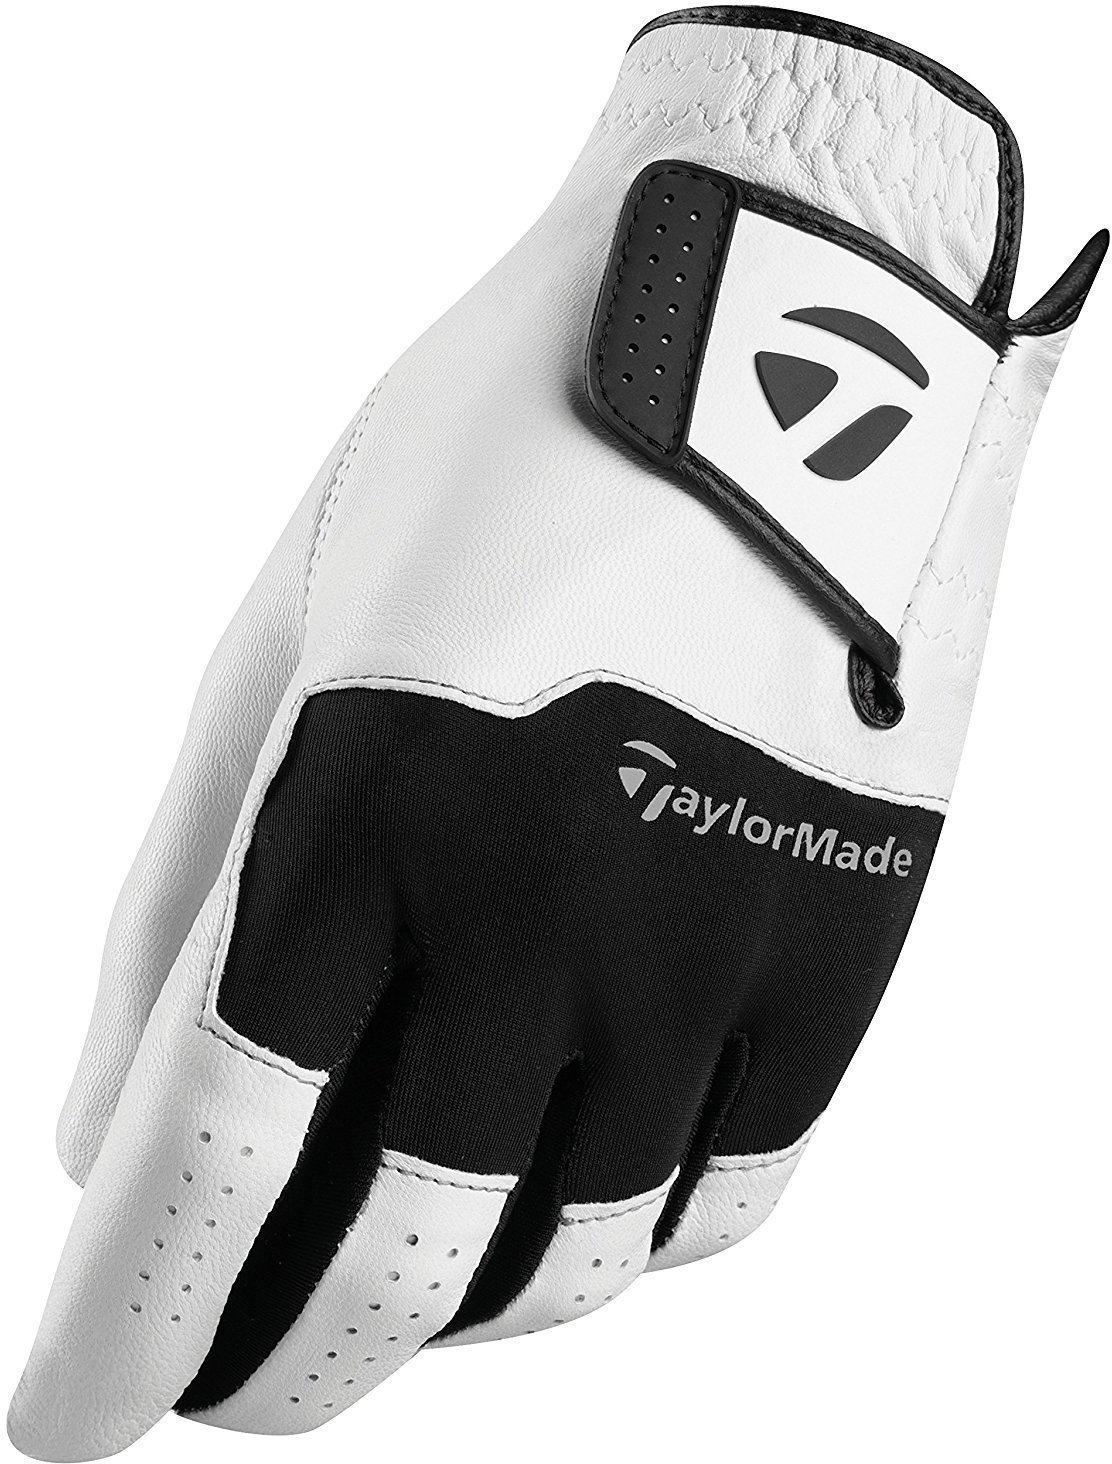 Gloves TaylorMade Stratus Leather Mens Golf Glove White/Black LH L